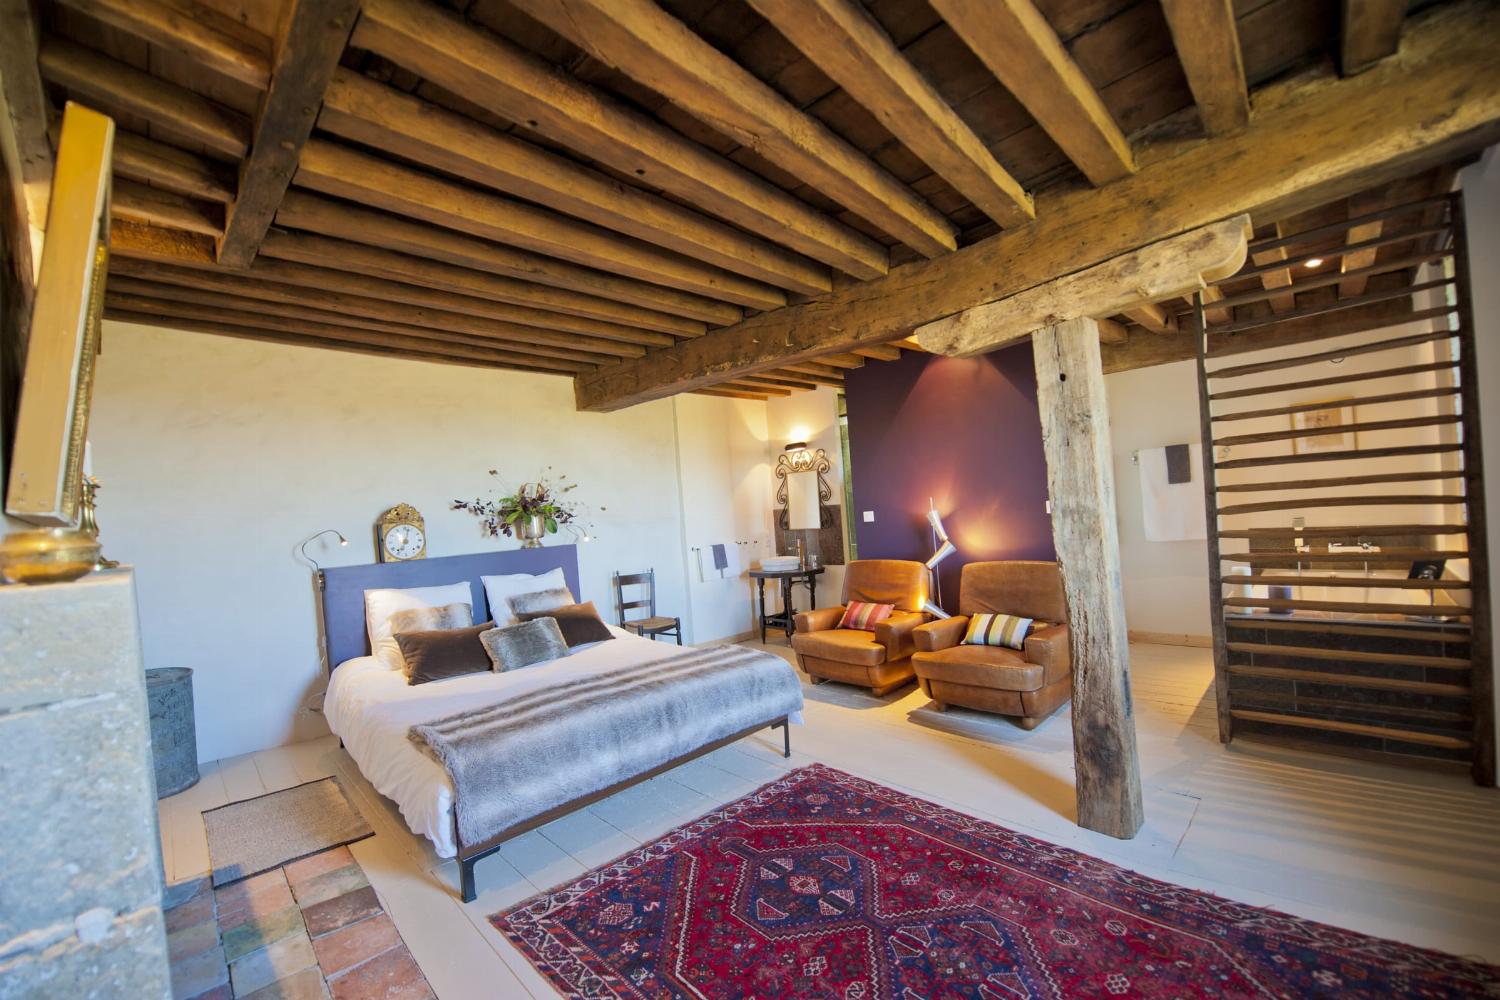 Bedroom | Holiday home in South West France